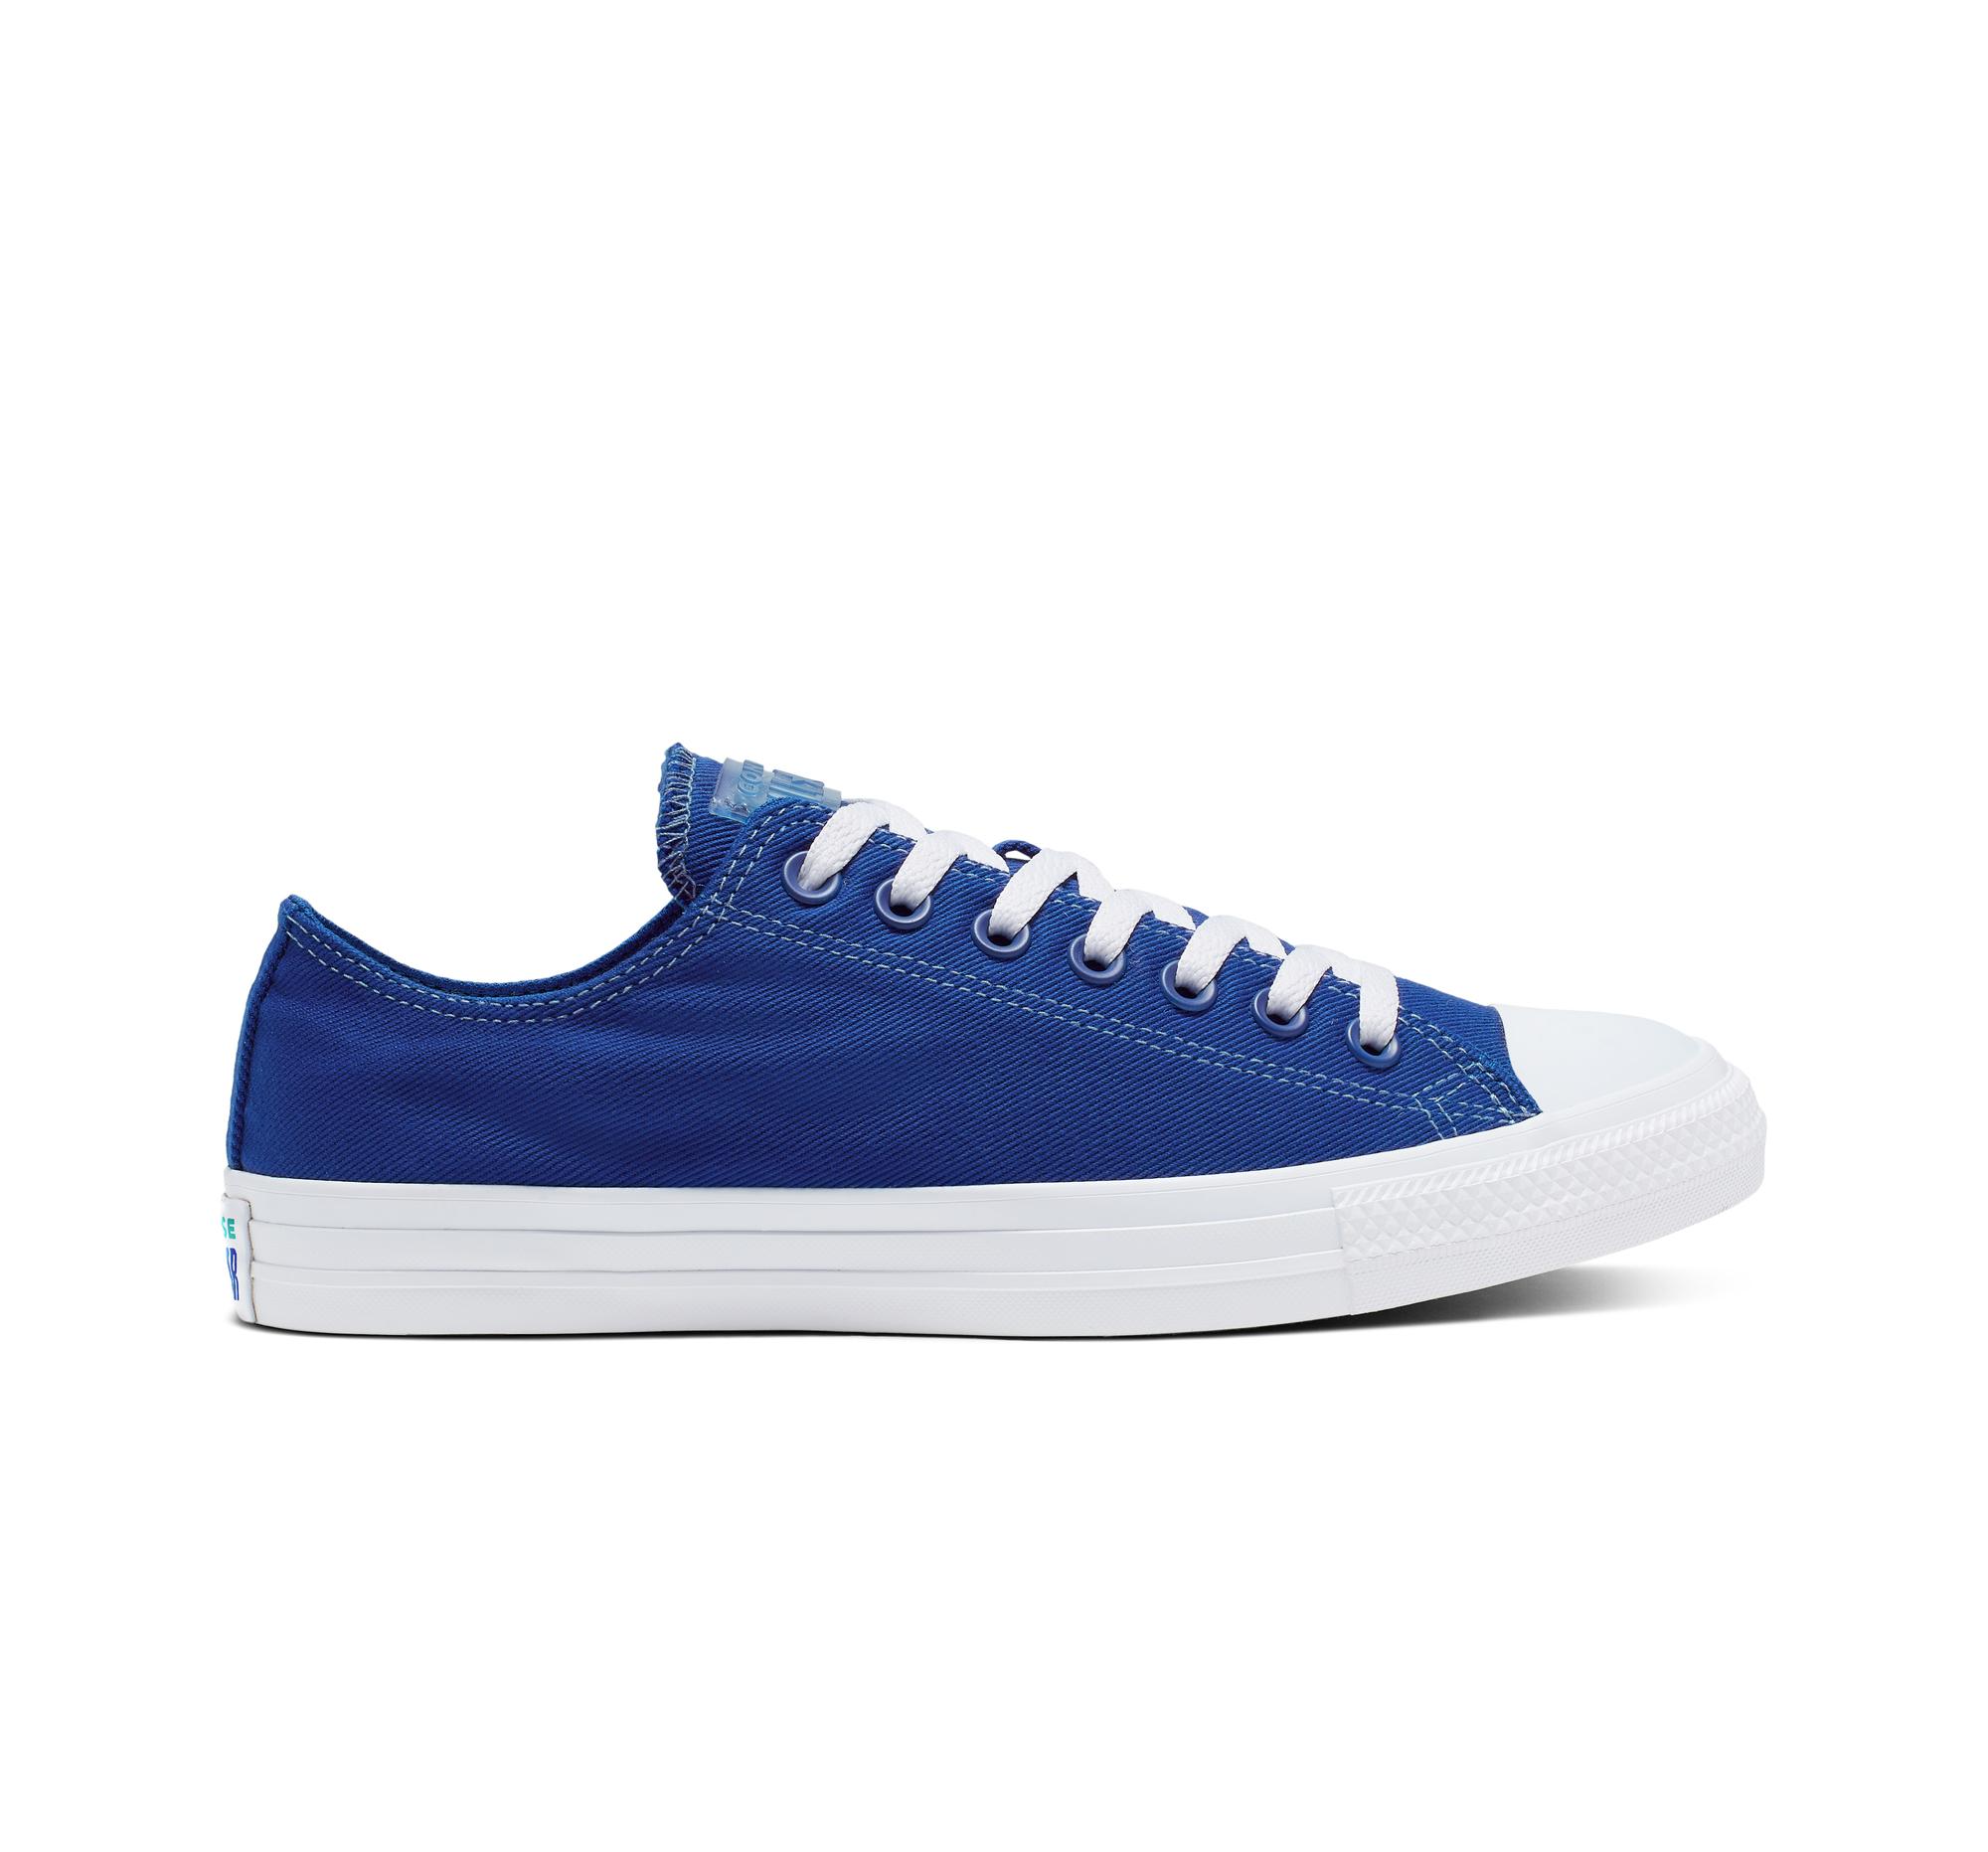 Converse Chuck Taylor All Star Space Racer Low Top in Blue for Men - Lyst